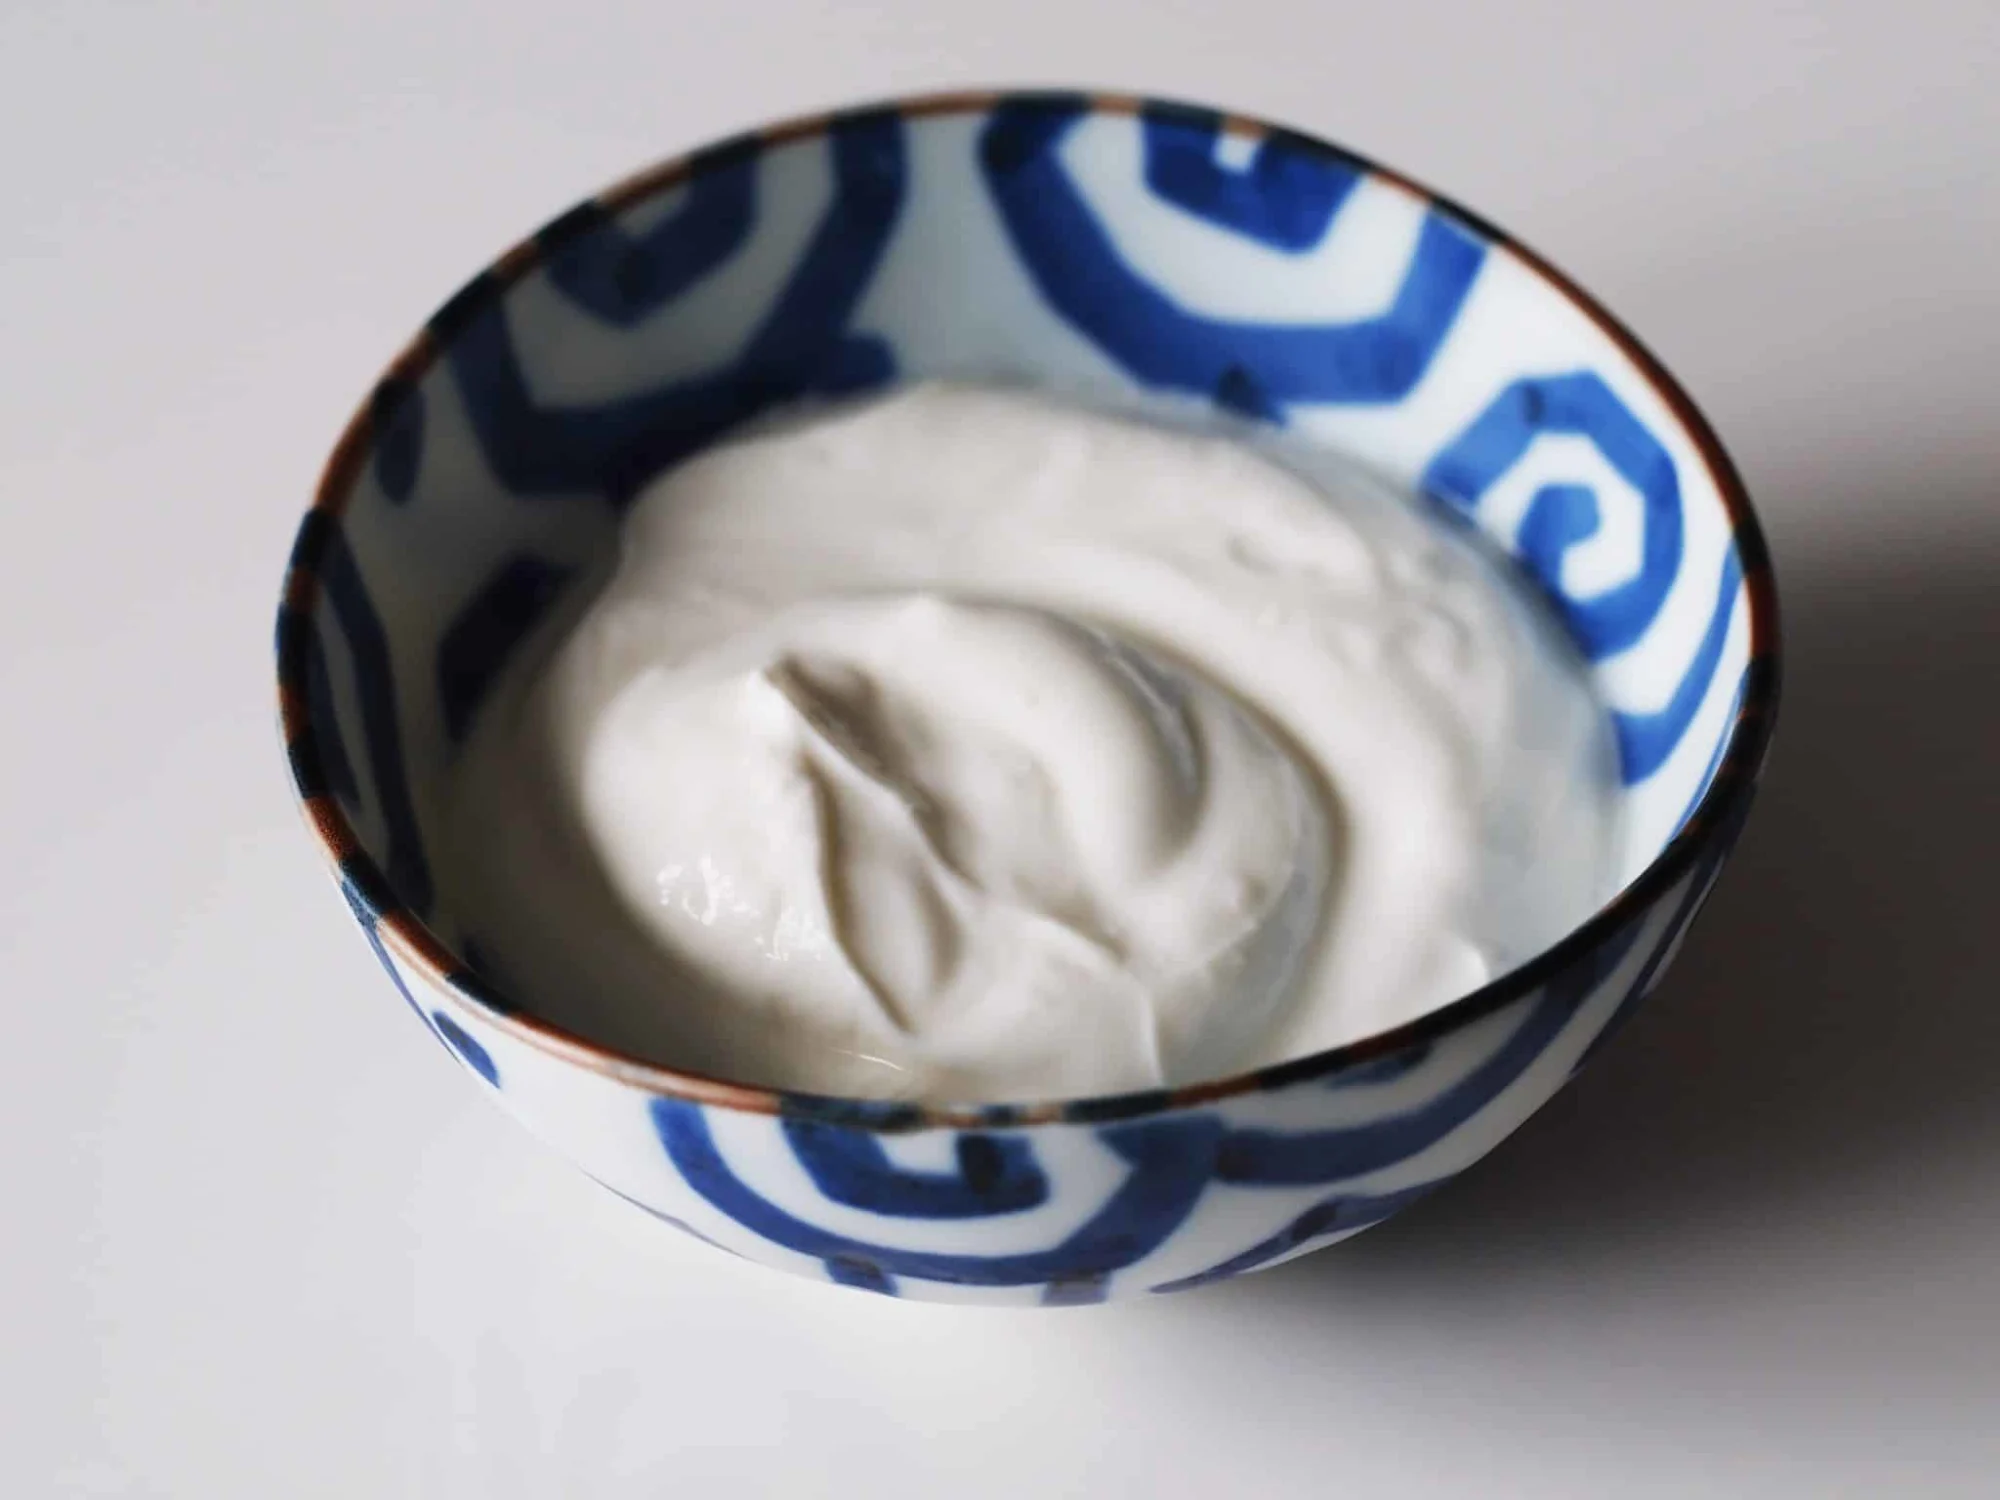 A bowl of yogurt being prepared for a baby starting solid foods